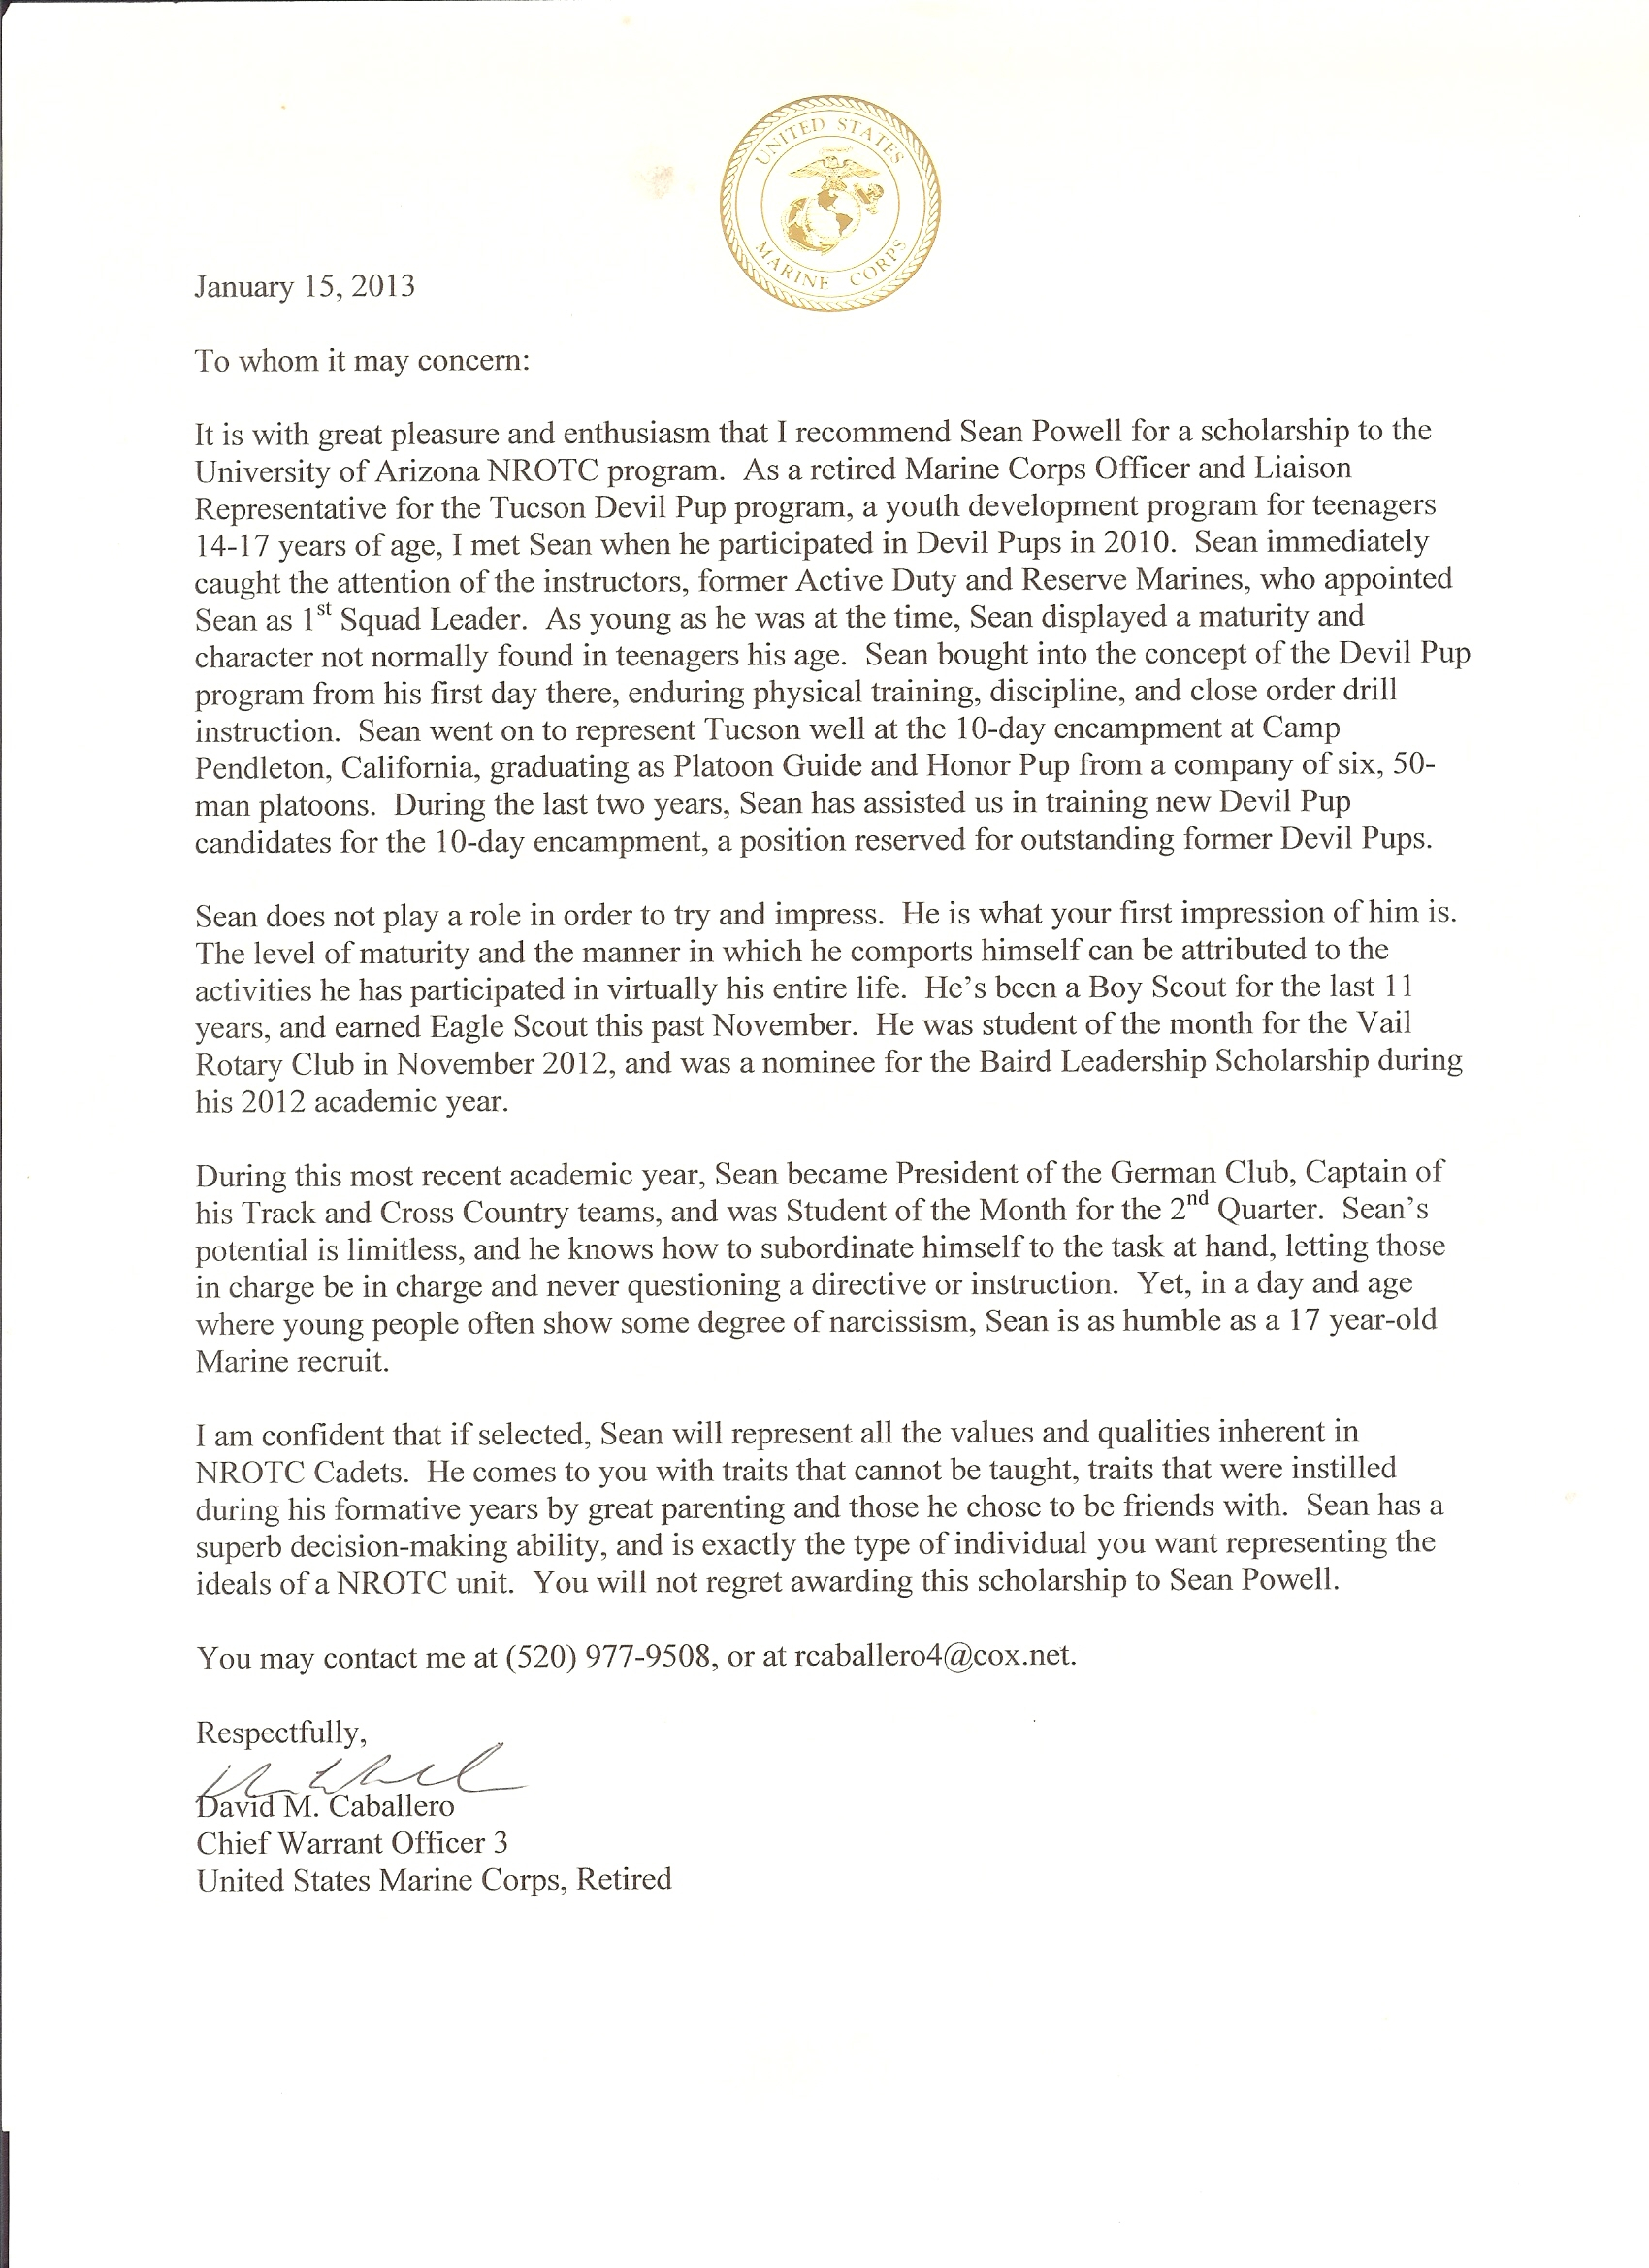 Marine Corps Letter Of Recommendation Example Debandje within dimensions 1700 X 2338